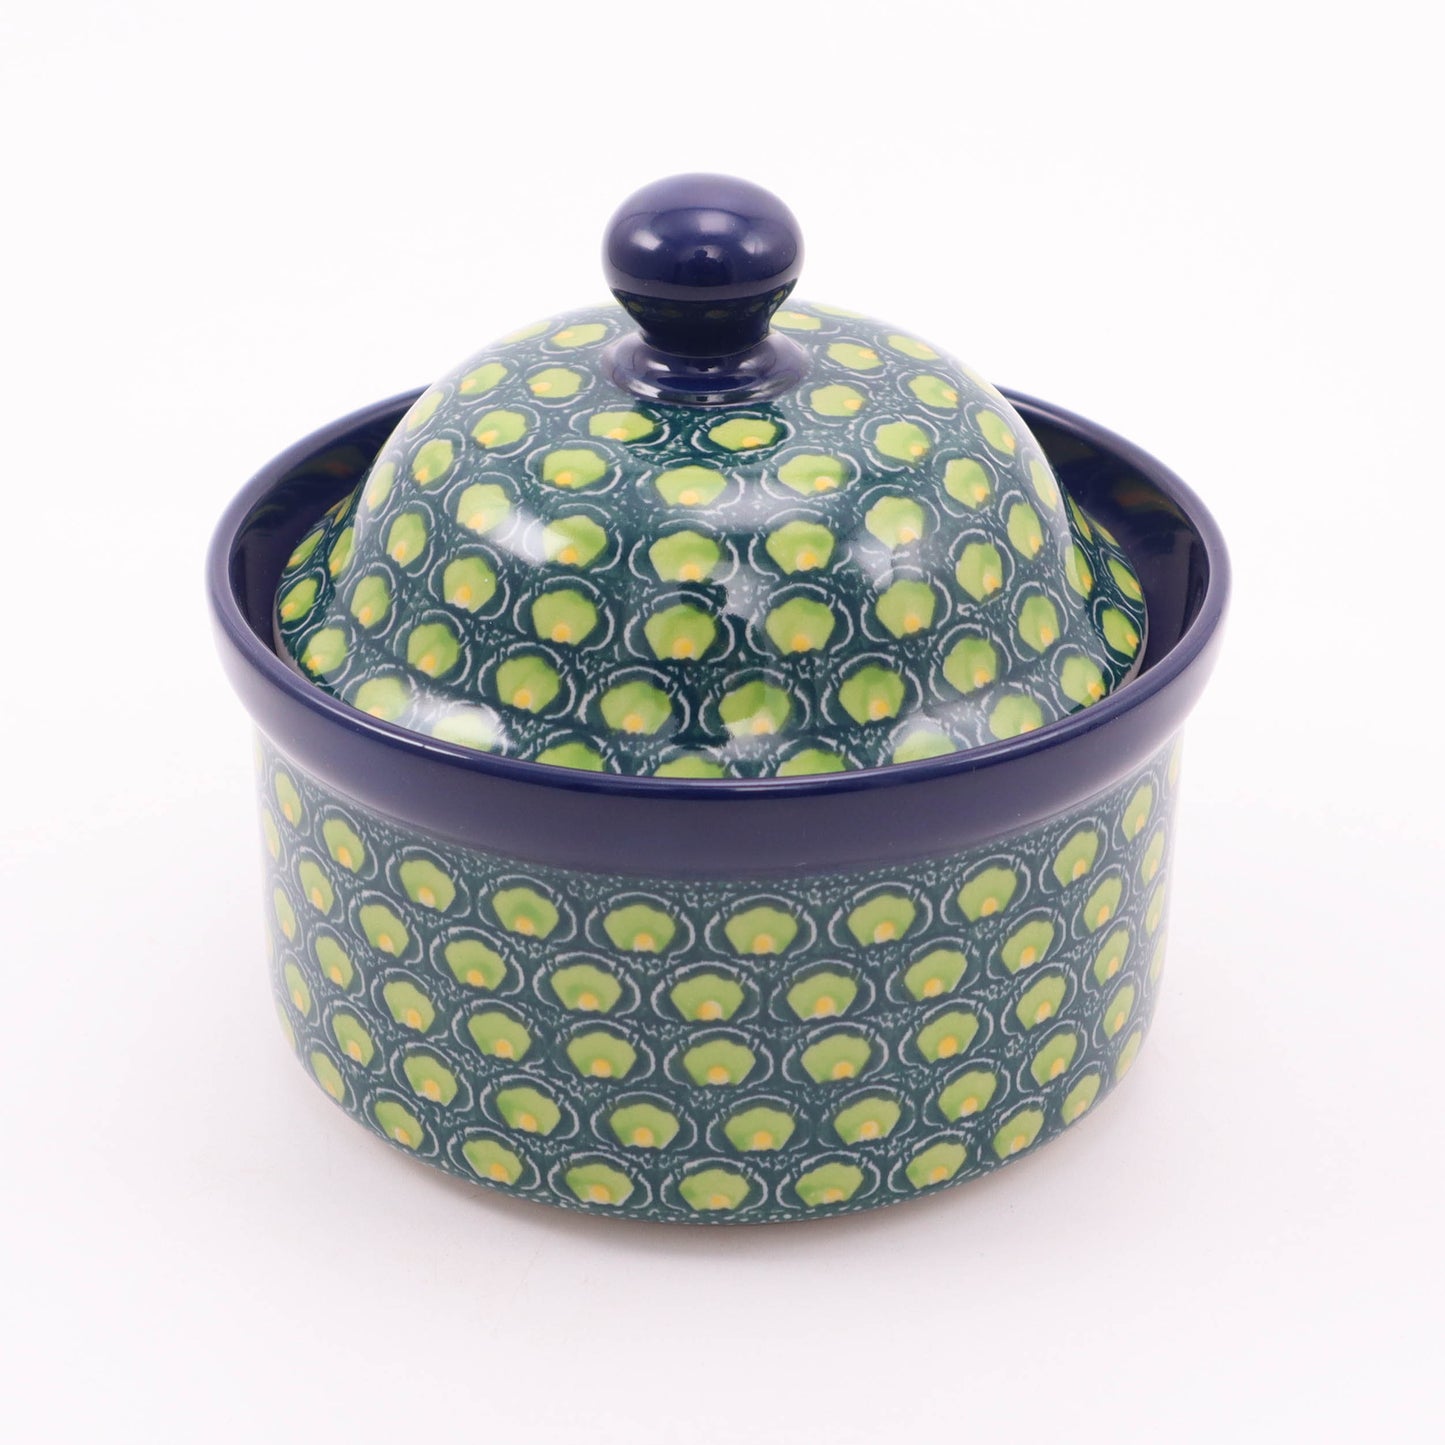 4"x5" Round Covered Dish. Pattern: Limelight